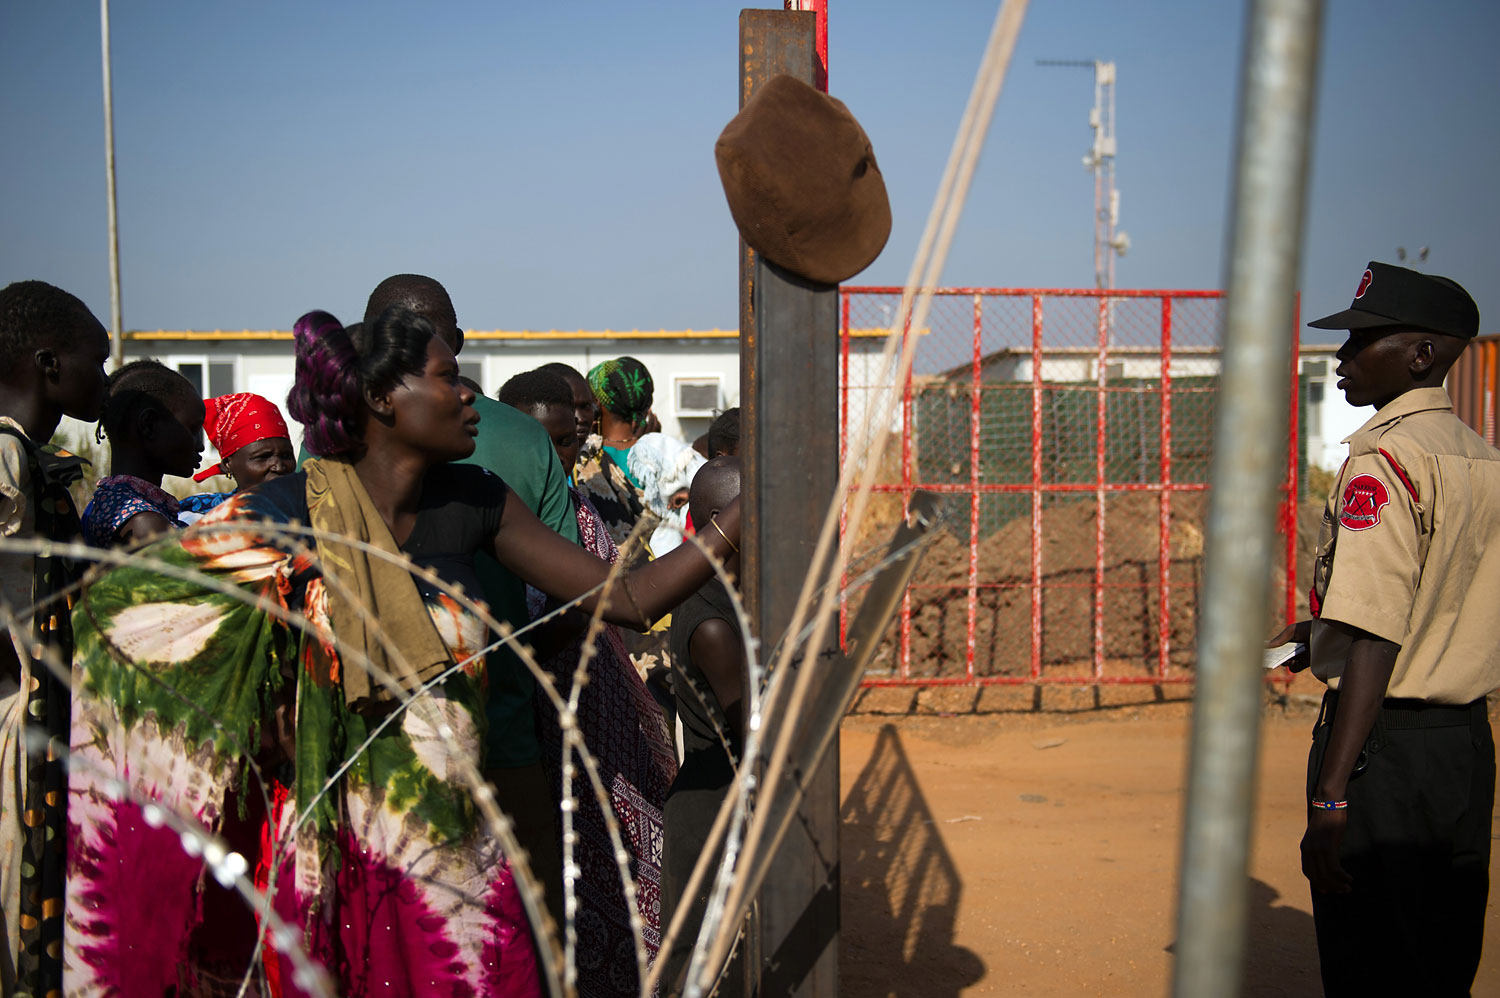 People stand at the gates of a spontaneous camp for internally displaced persons at the United Nations Mission to South Sudan base in Juba, South Sudan, on Jan. 9, 2014. Over 17,000 people are living at the base, with new arrivals every day, due to ongoing conflict in the world's youngest nation.